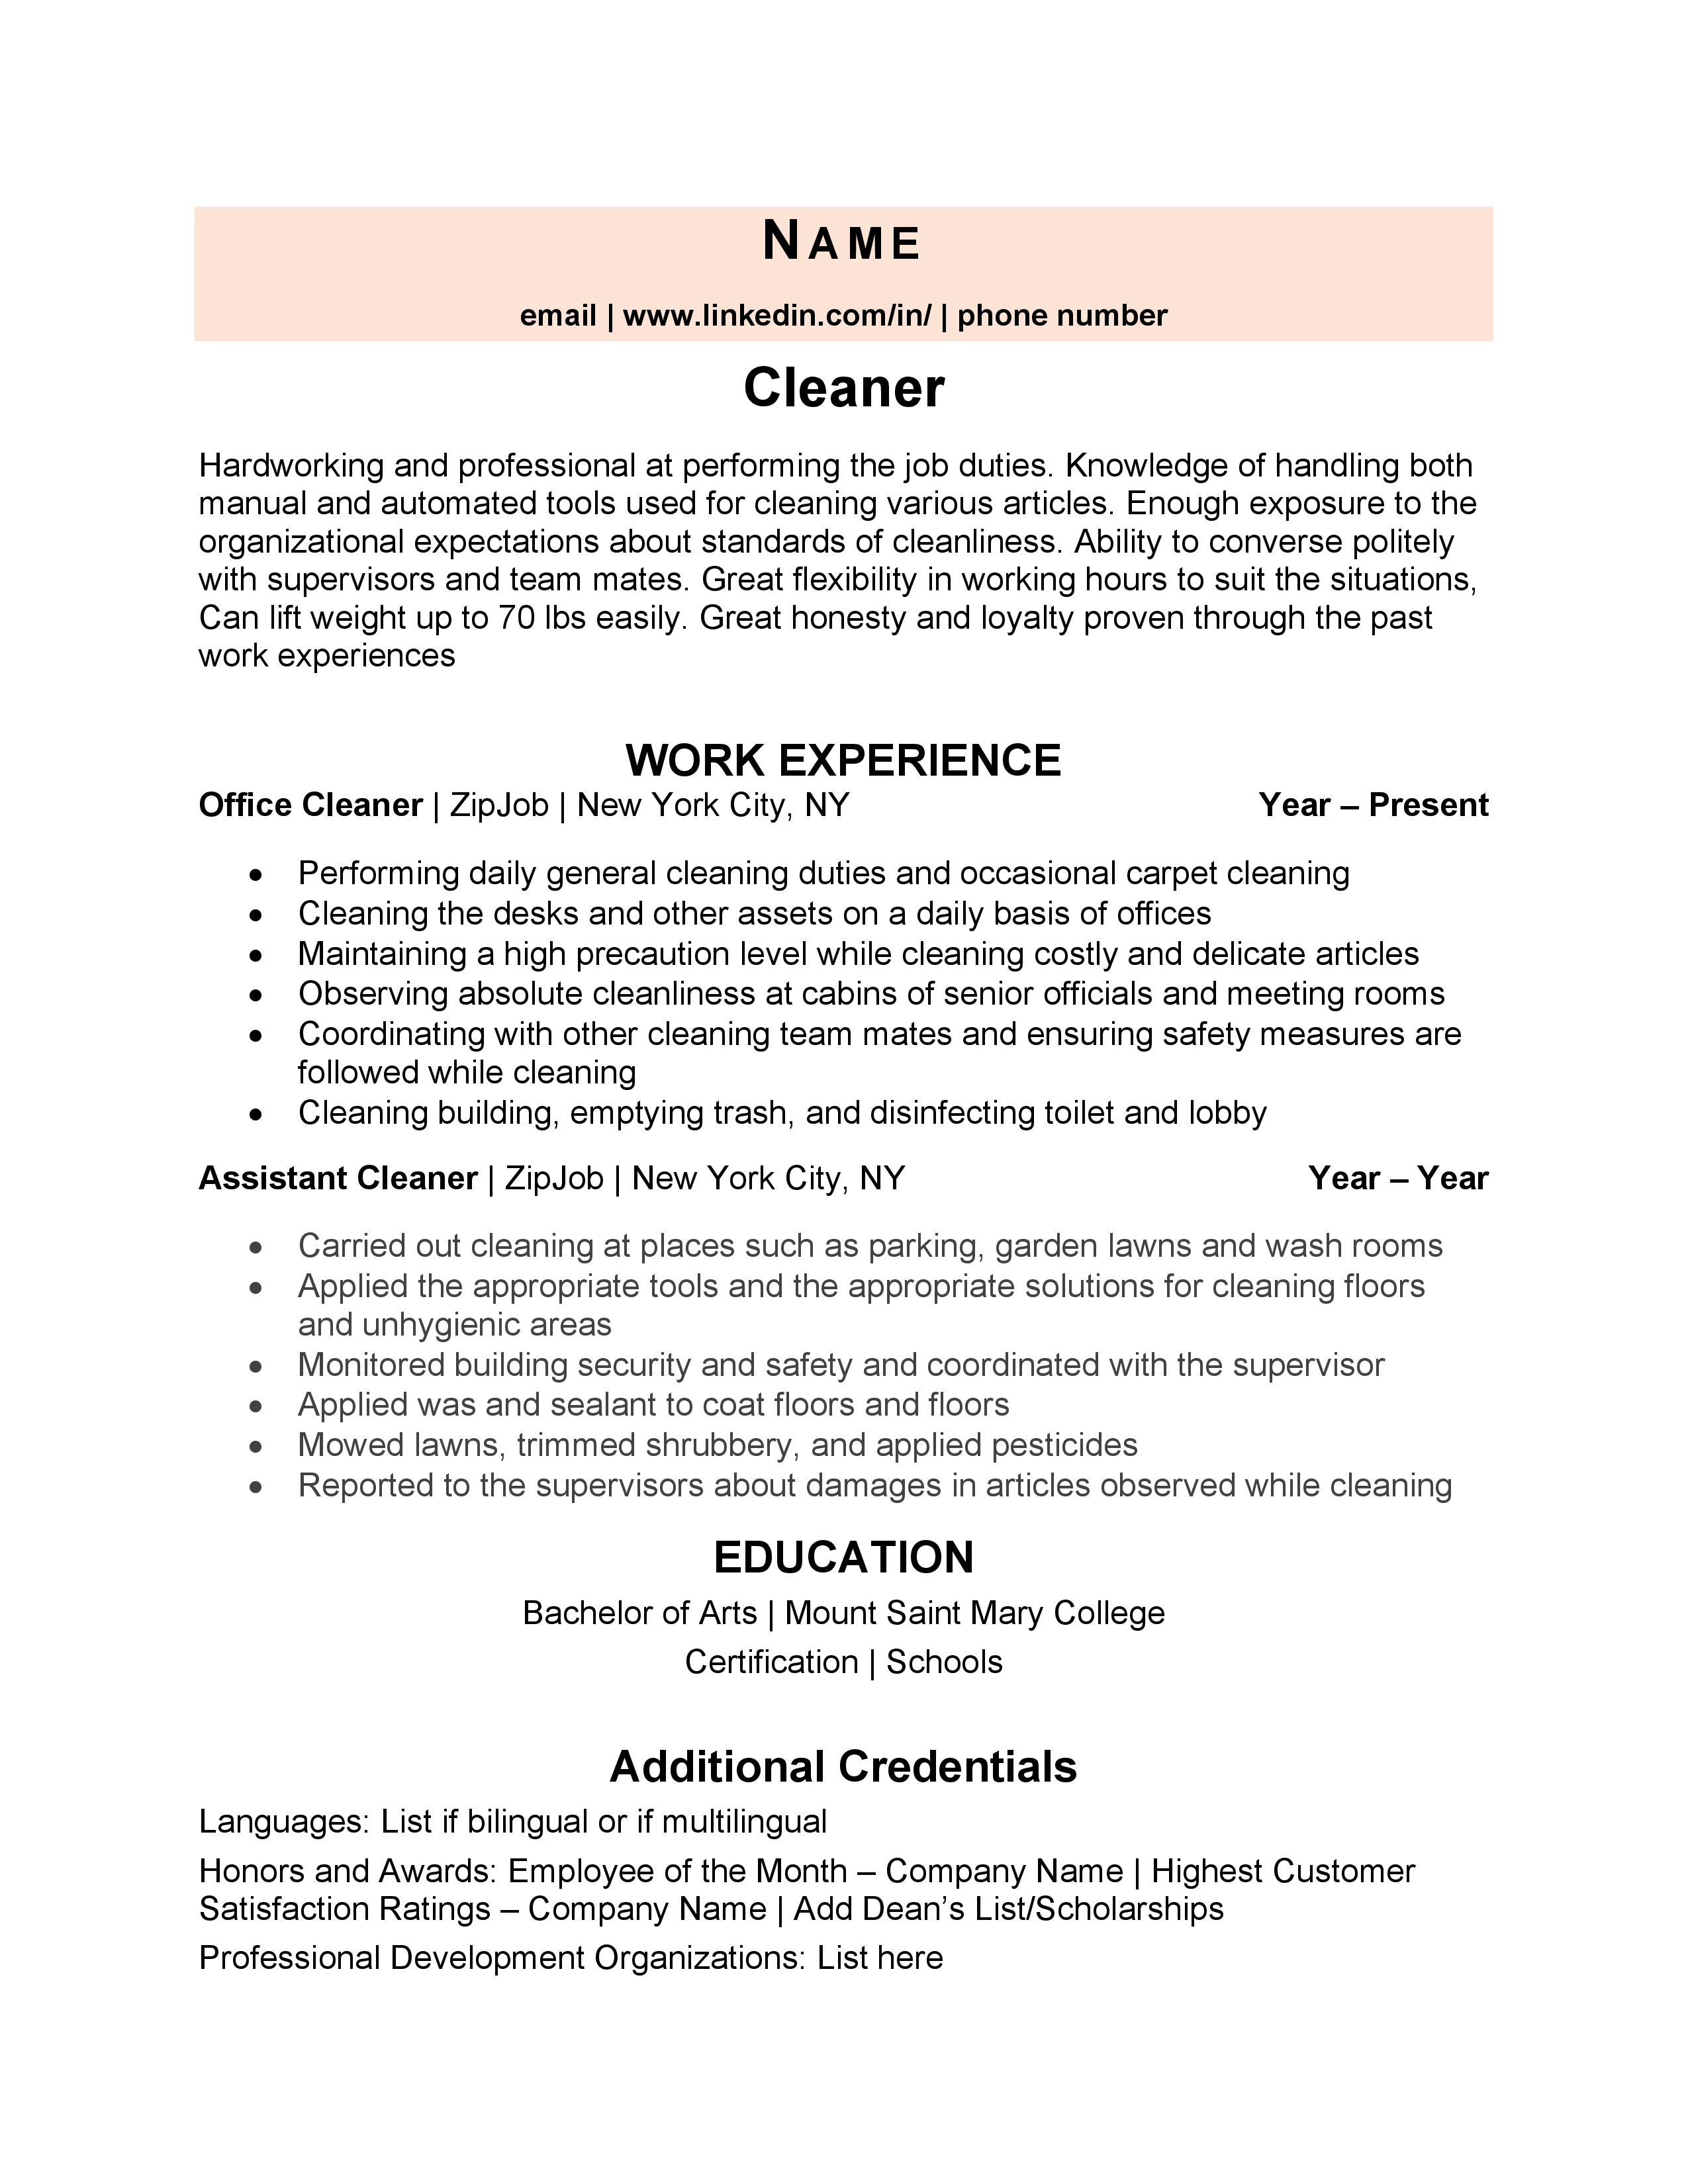 best objective for resume cleaner